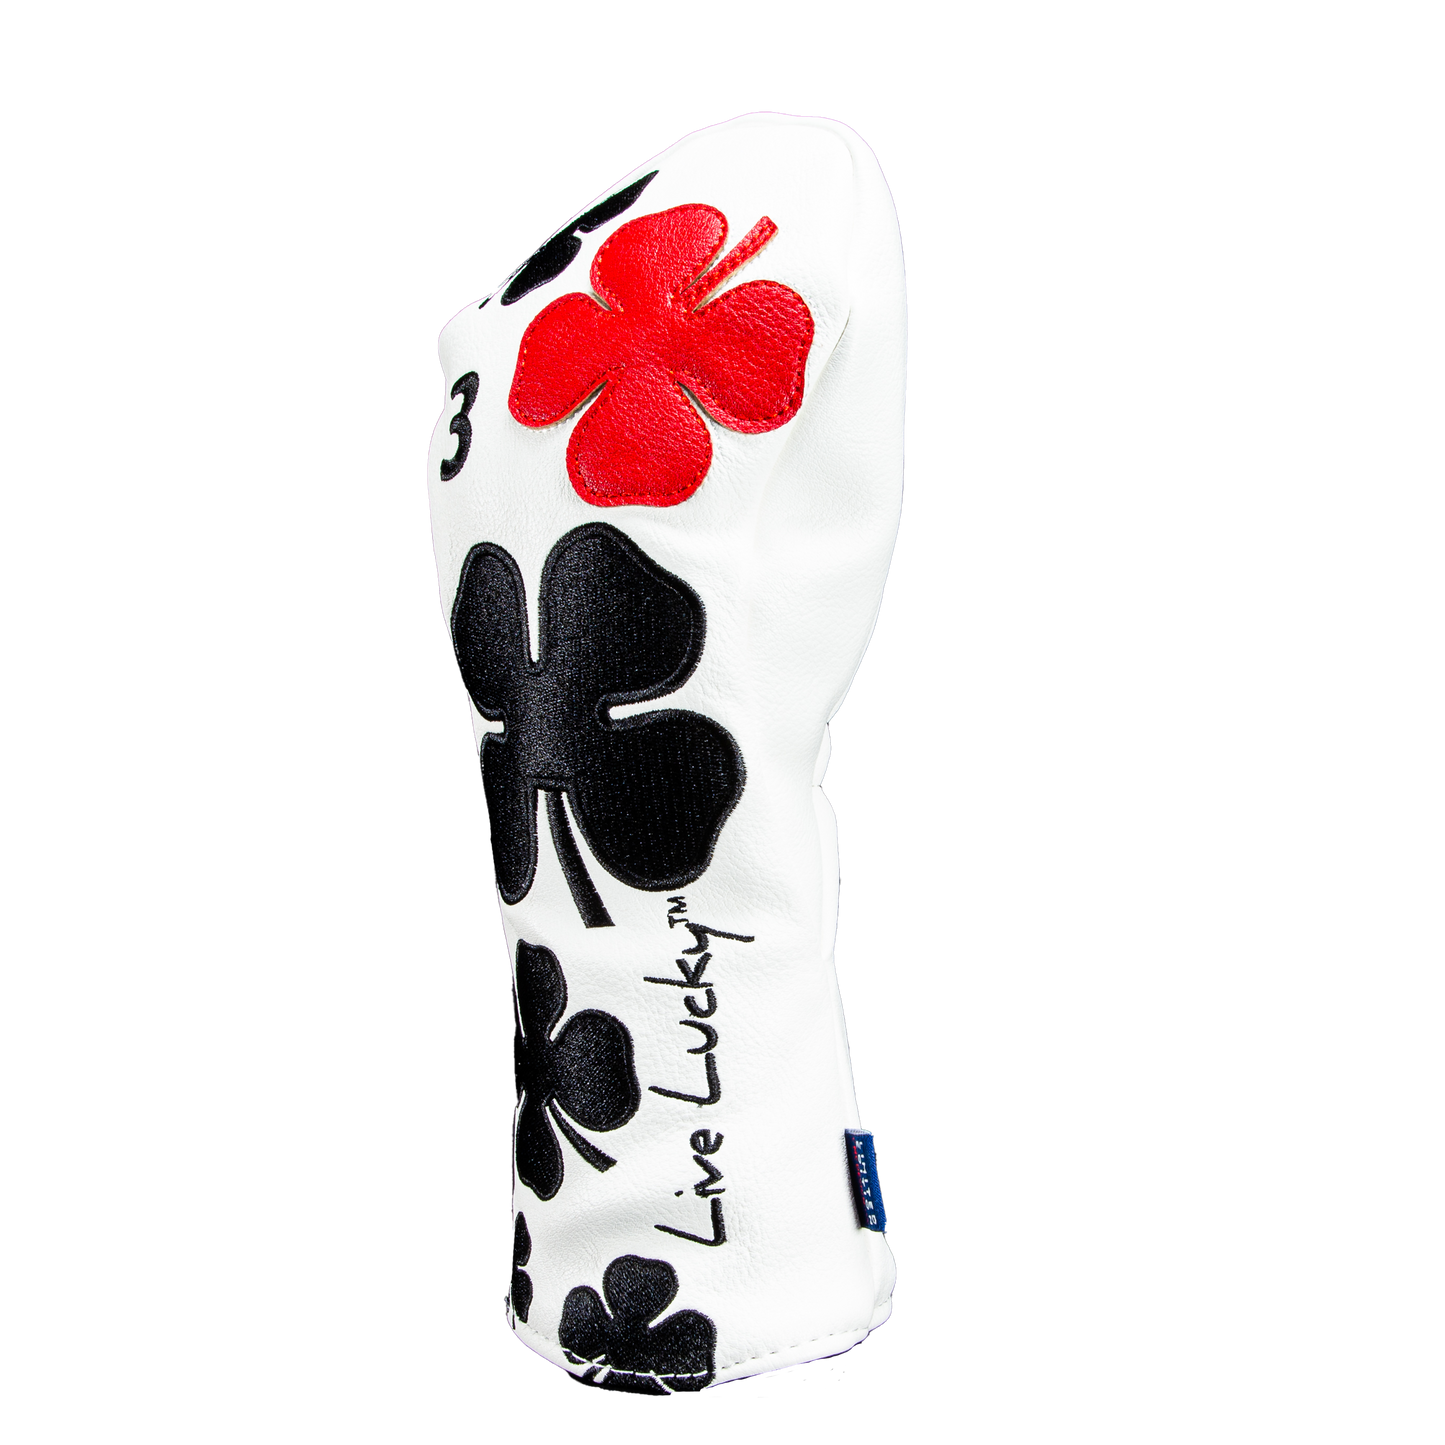 Live Lucky "Poker" 3 Wood Cover